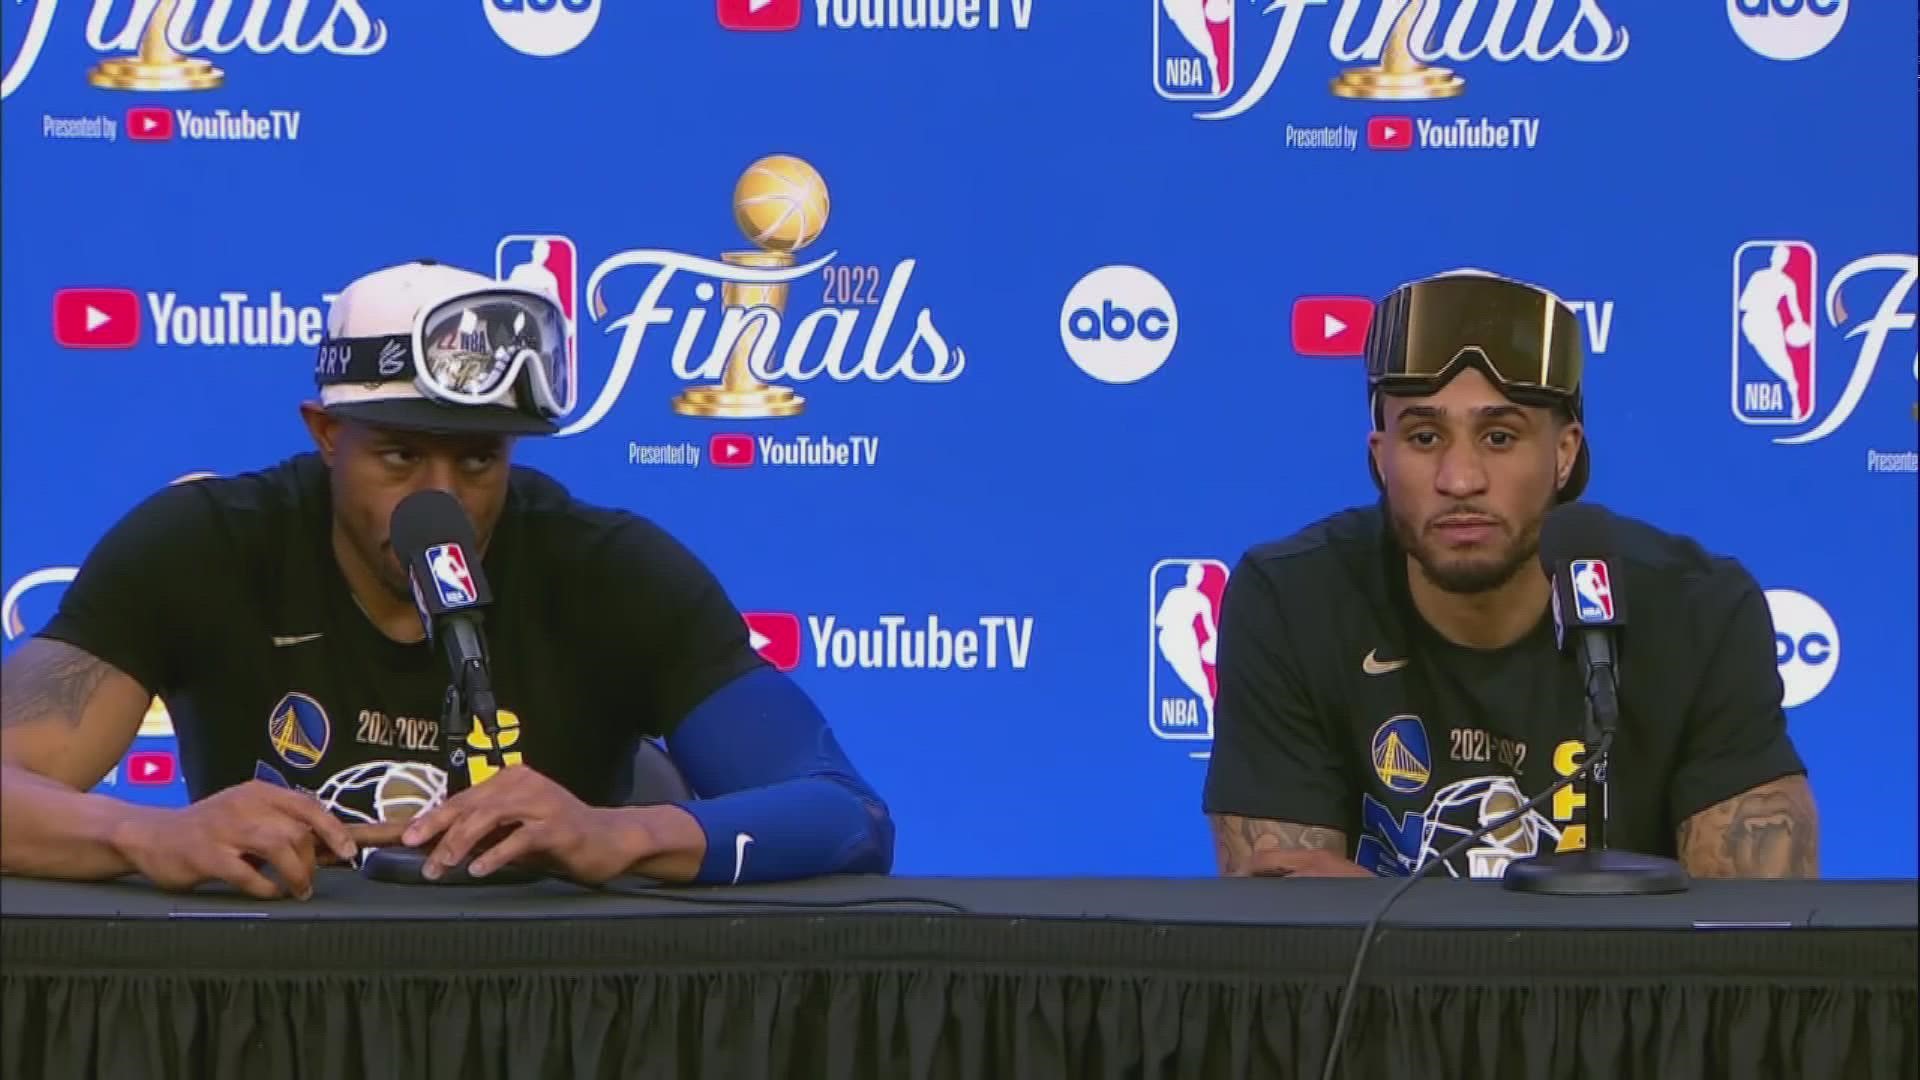 Live Golden State Warriors players Post Finals win conference abc10